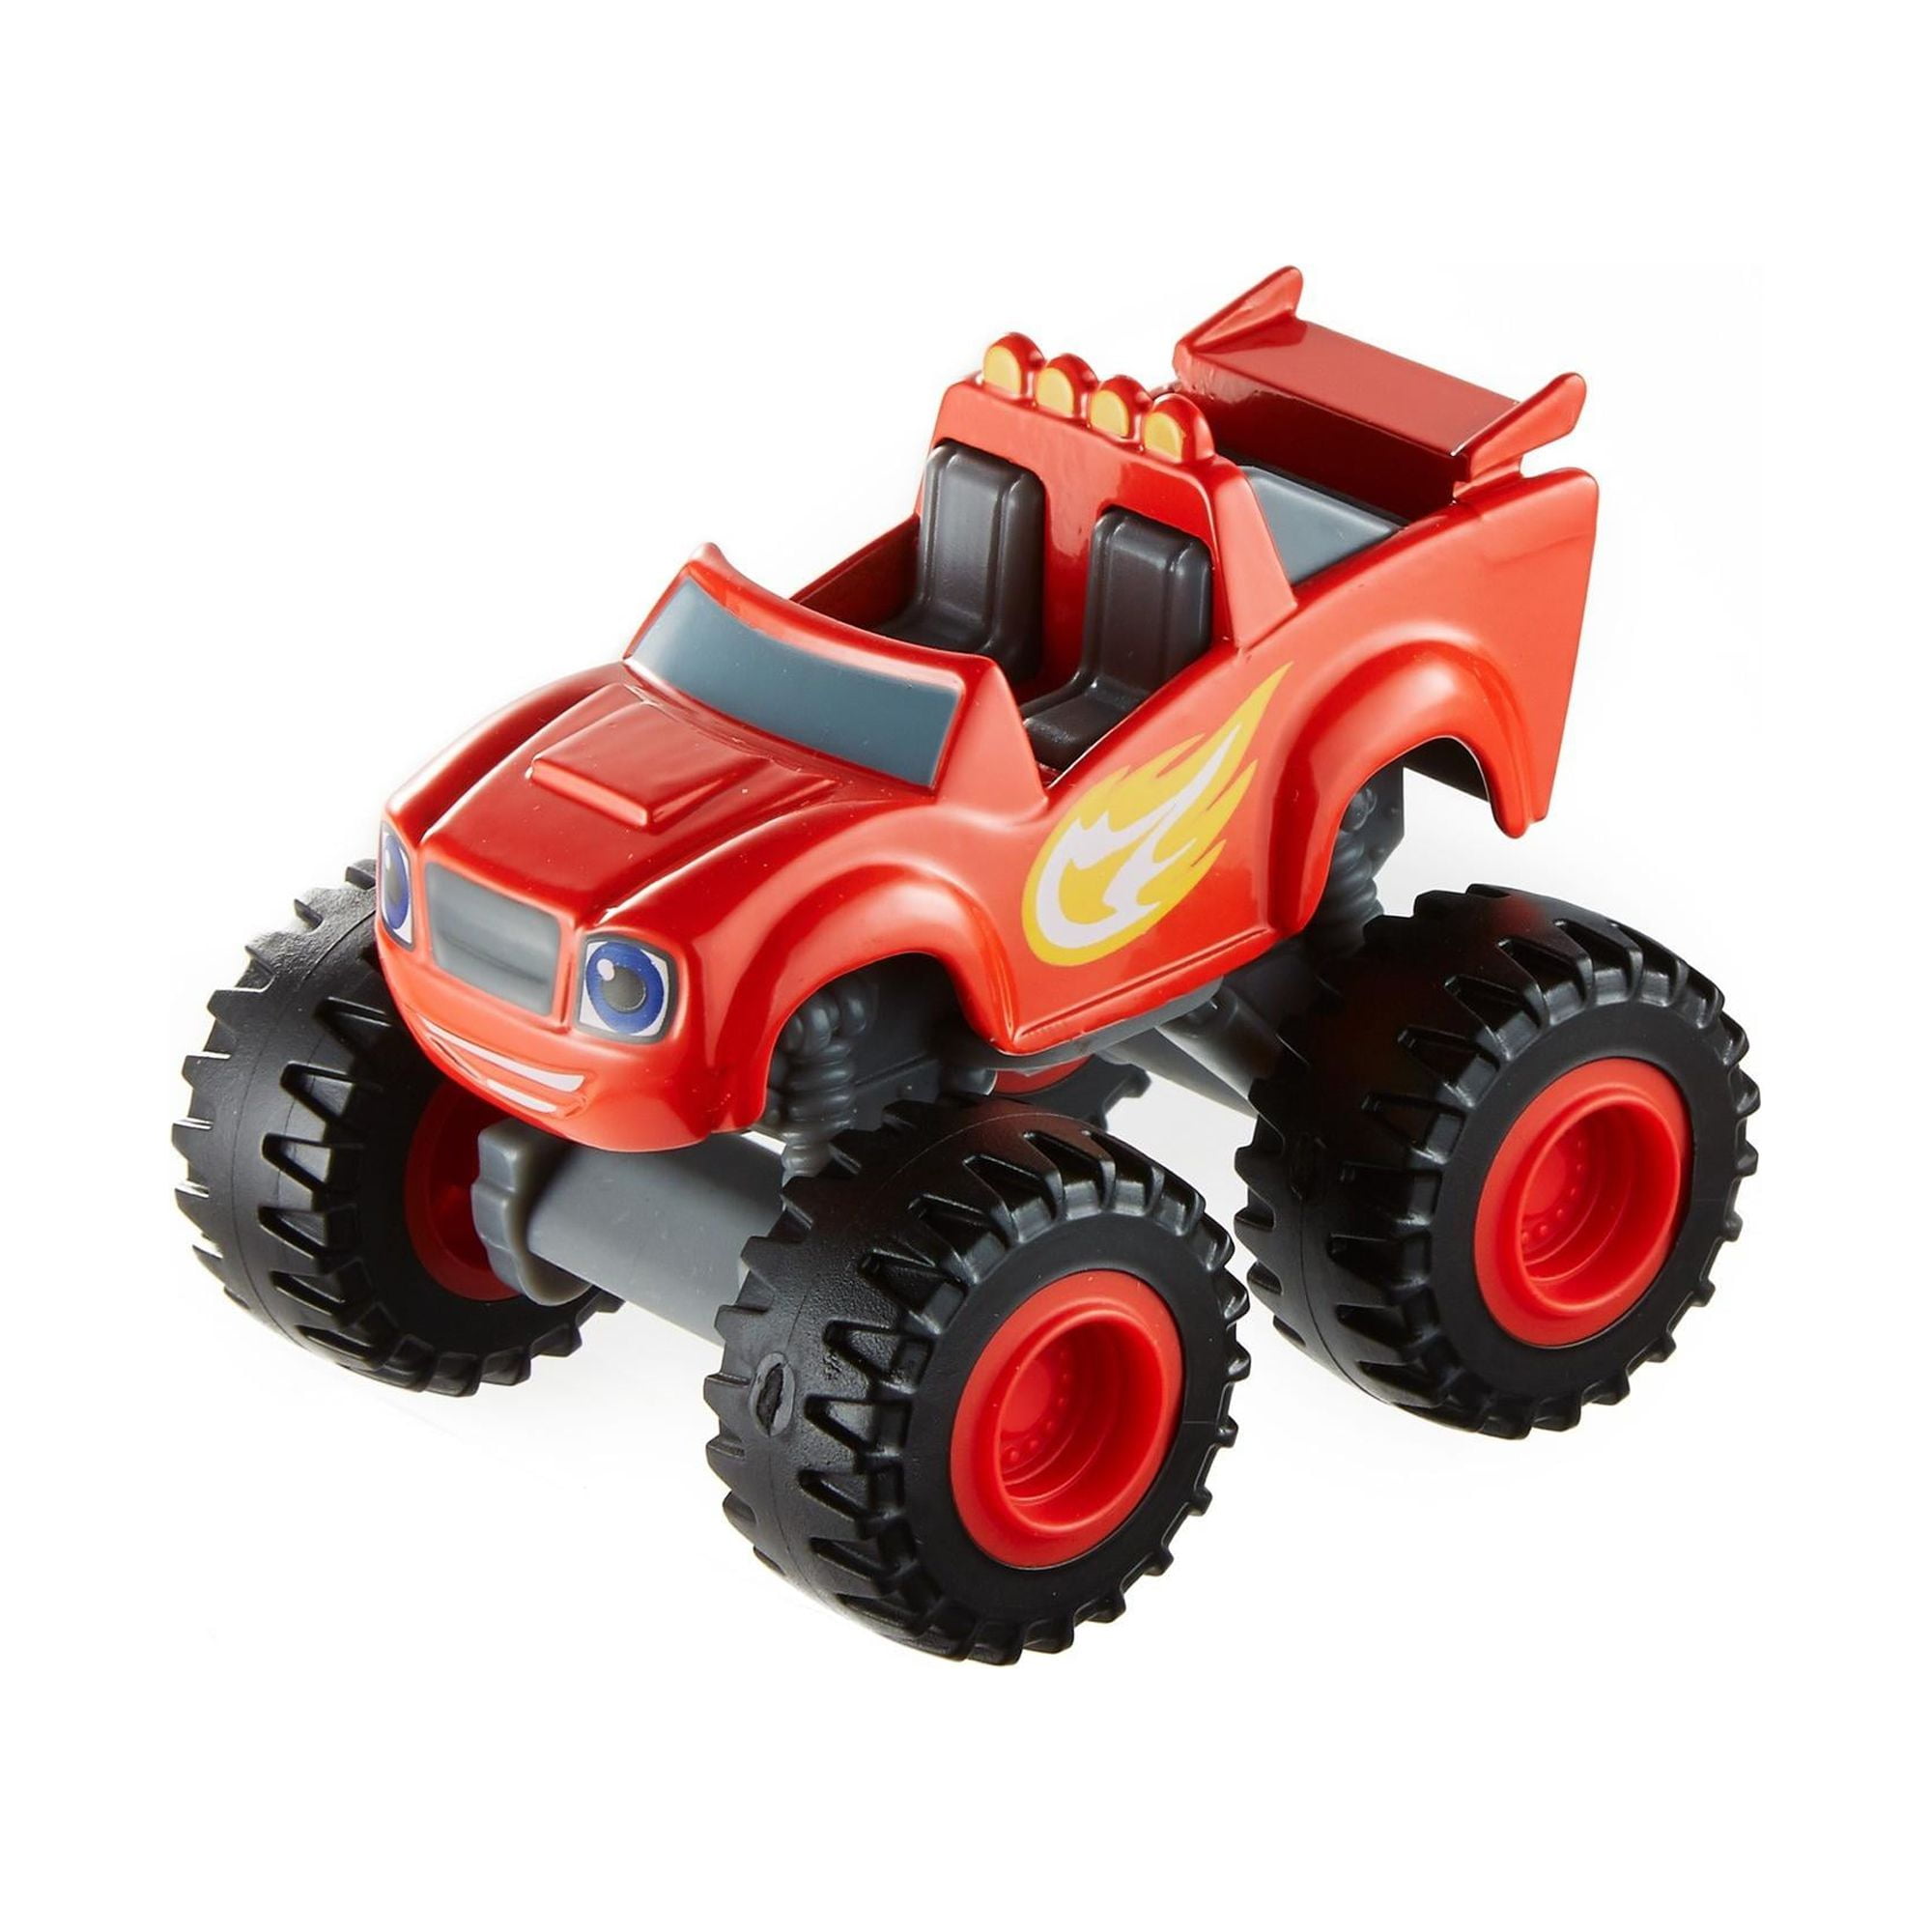 NKOK Blaze And The Monster Machines RC: High Performance Blaze -  Nickelodeon, Remote Control Offroad Monster Truck 